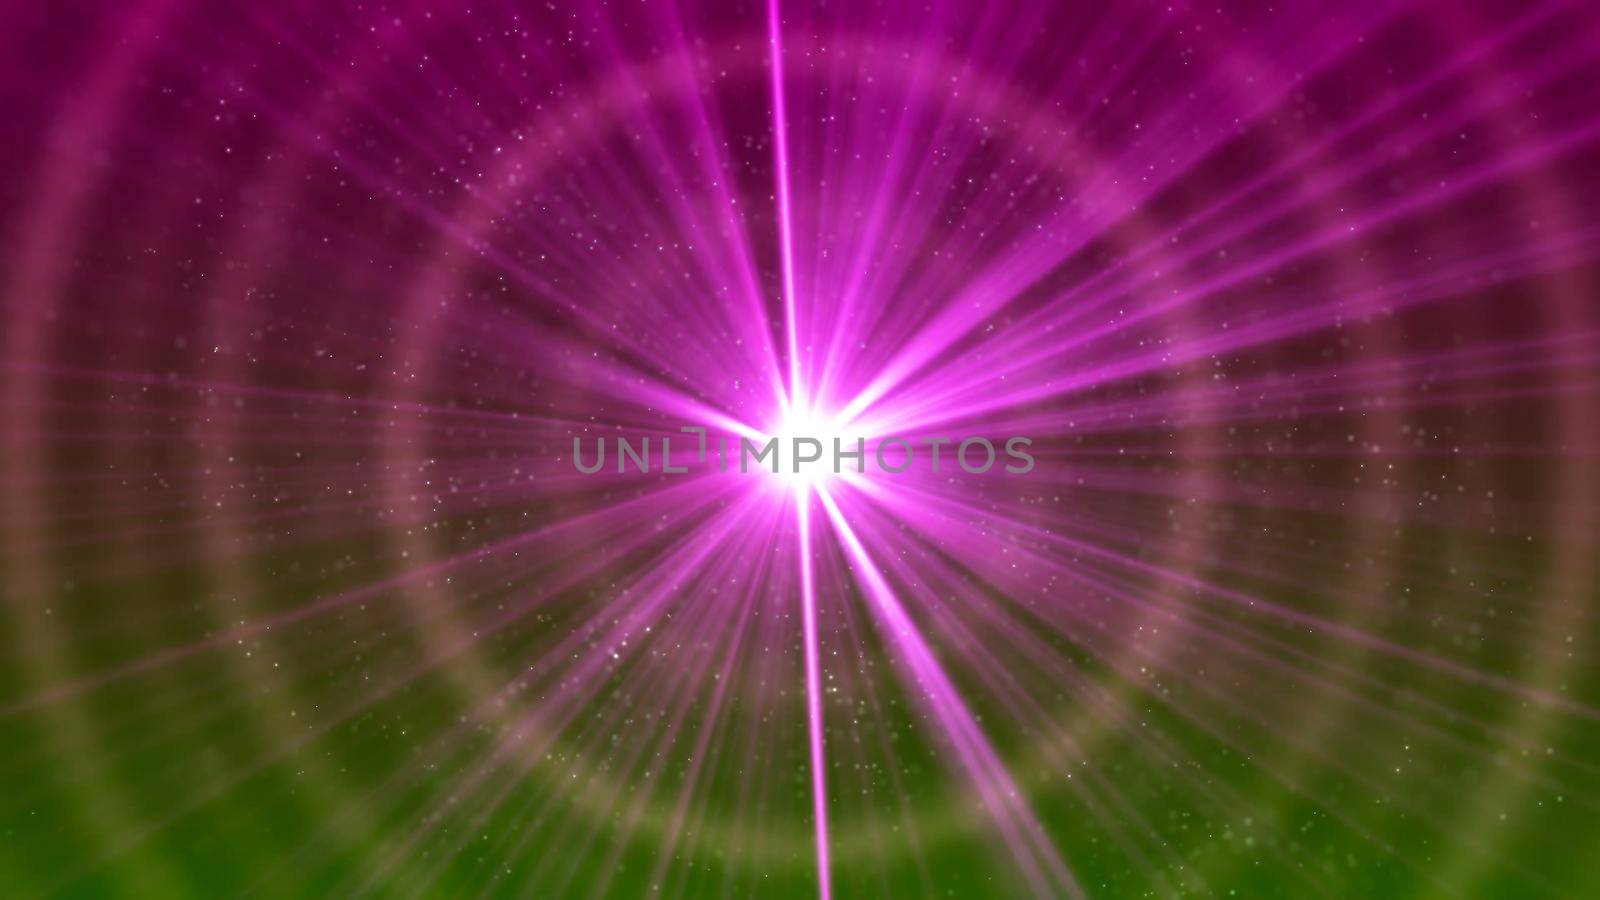 Background with nice pink star 3D rendering by designprojects